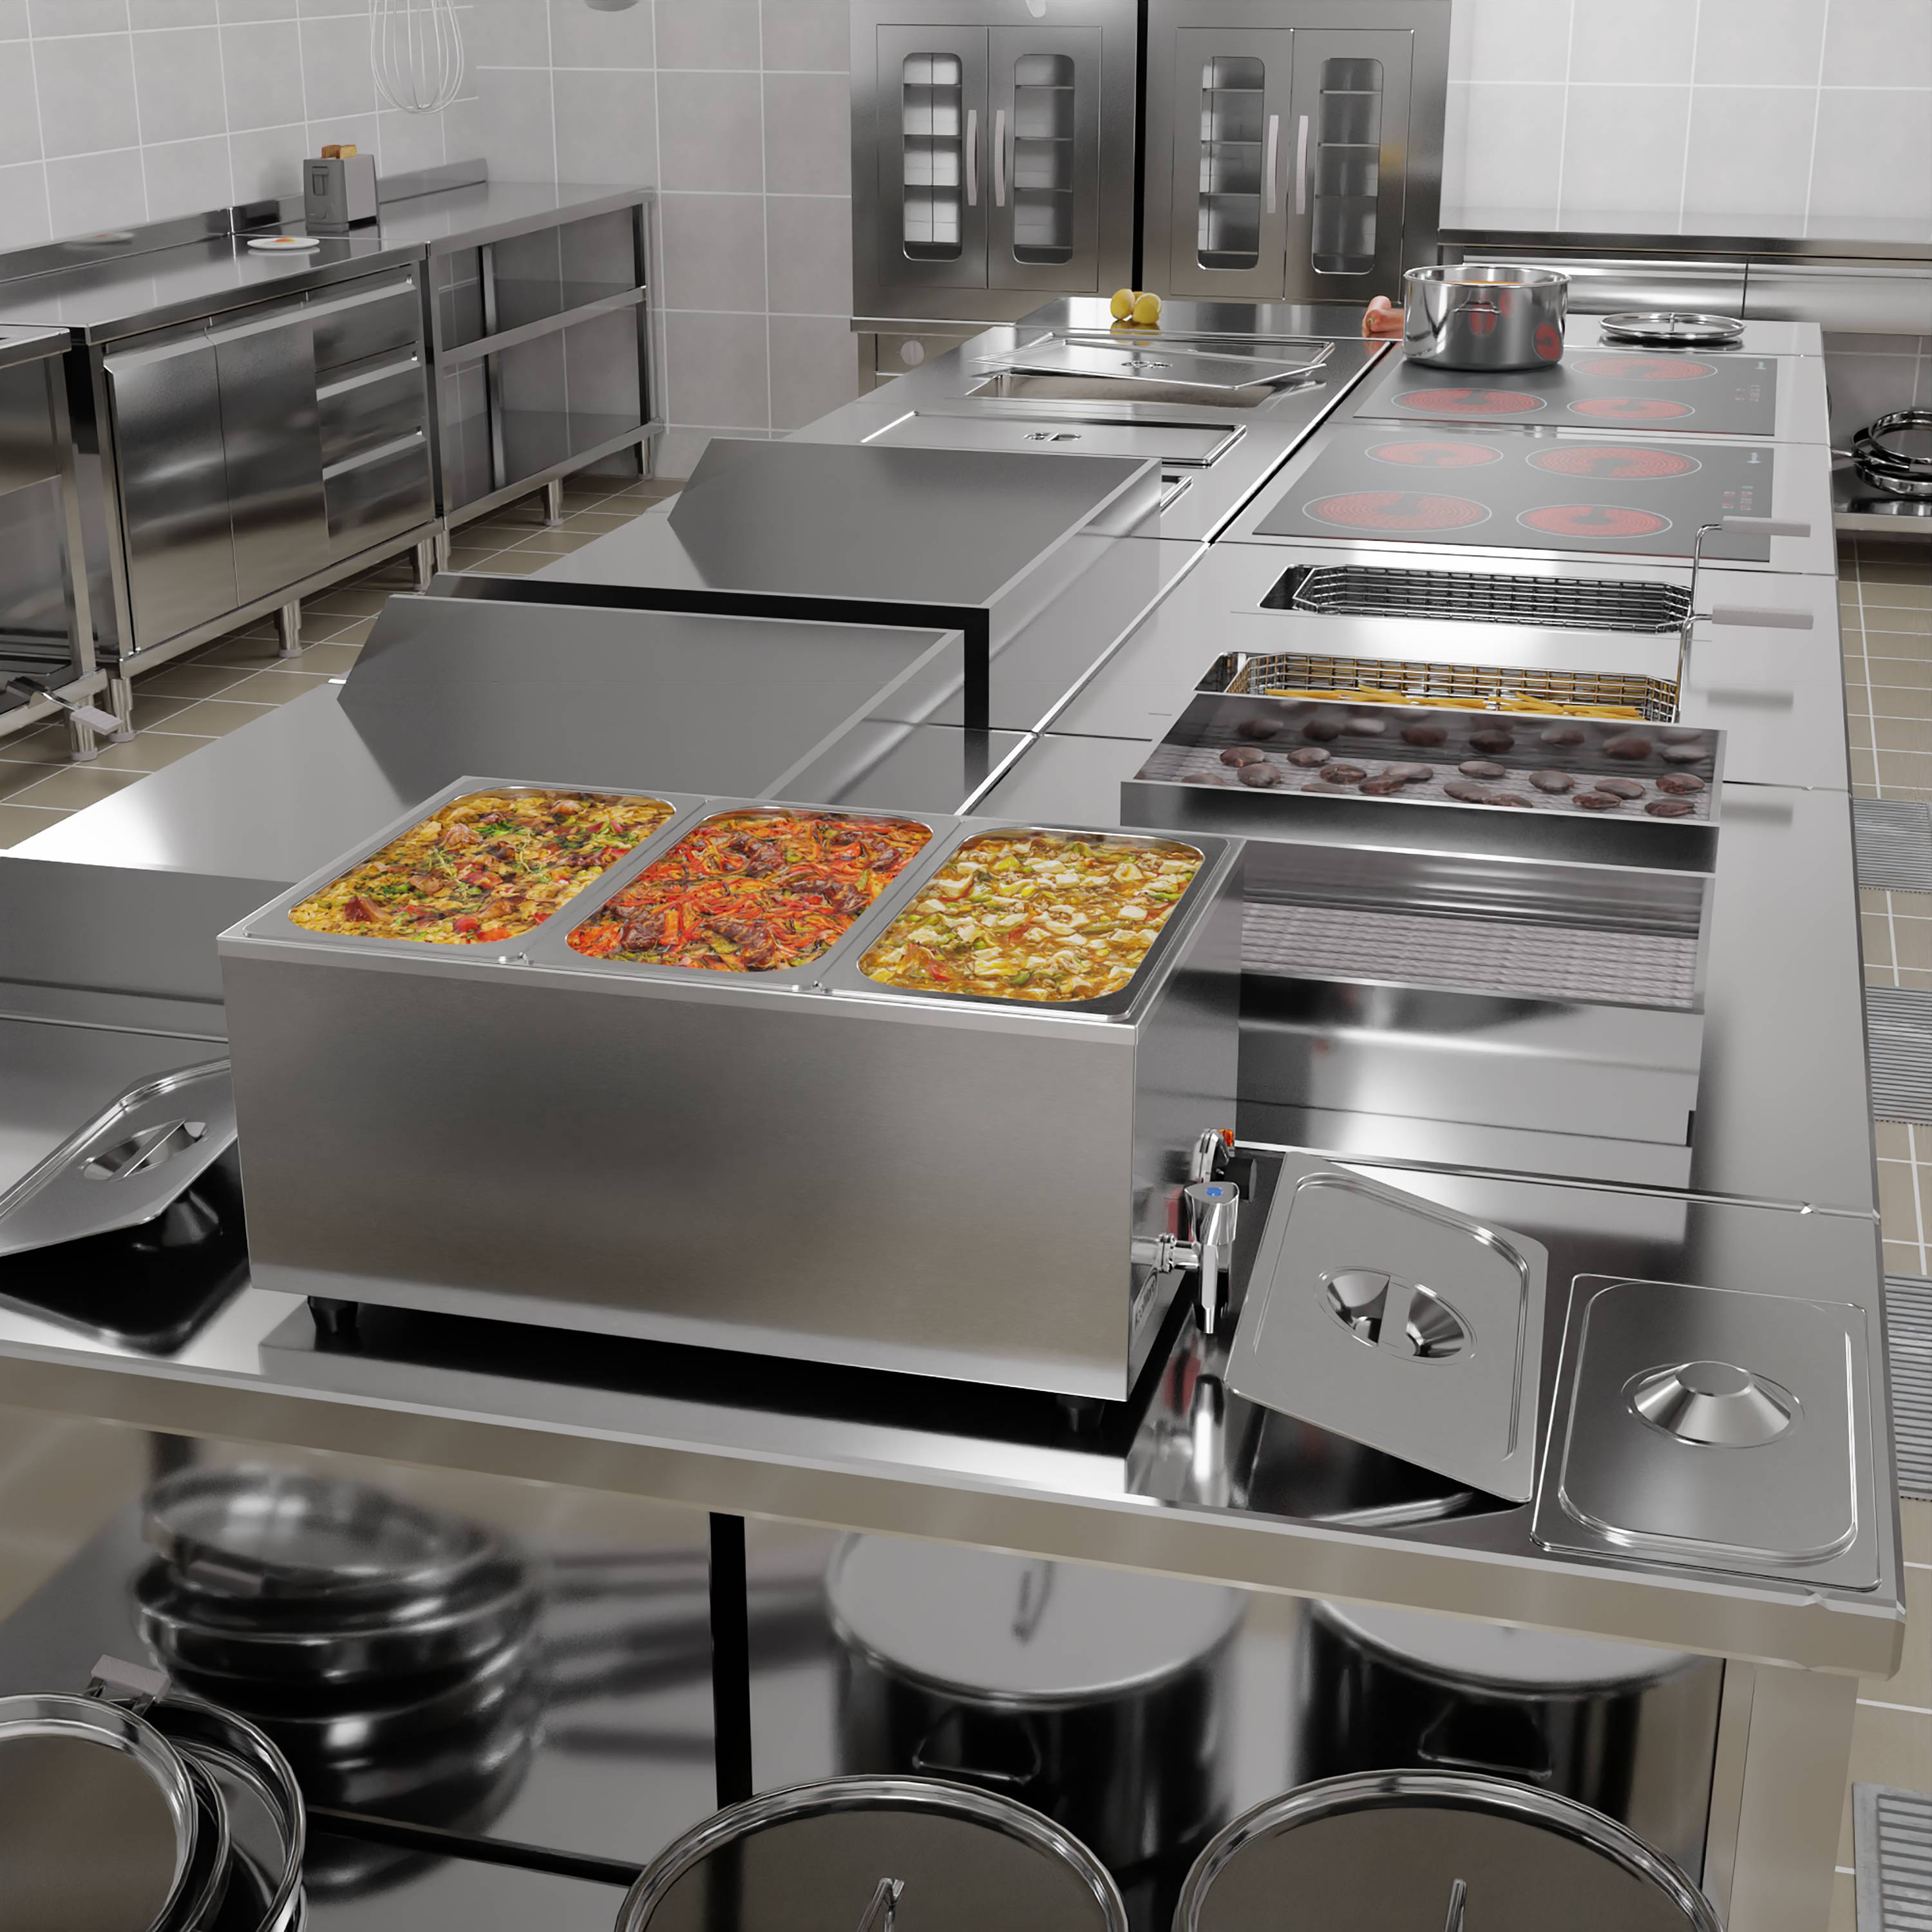 Commercial Kitchen Supplies & Utensils - Home, Restaurant and